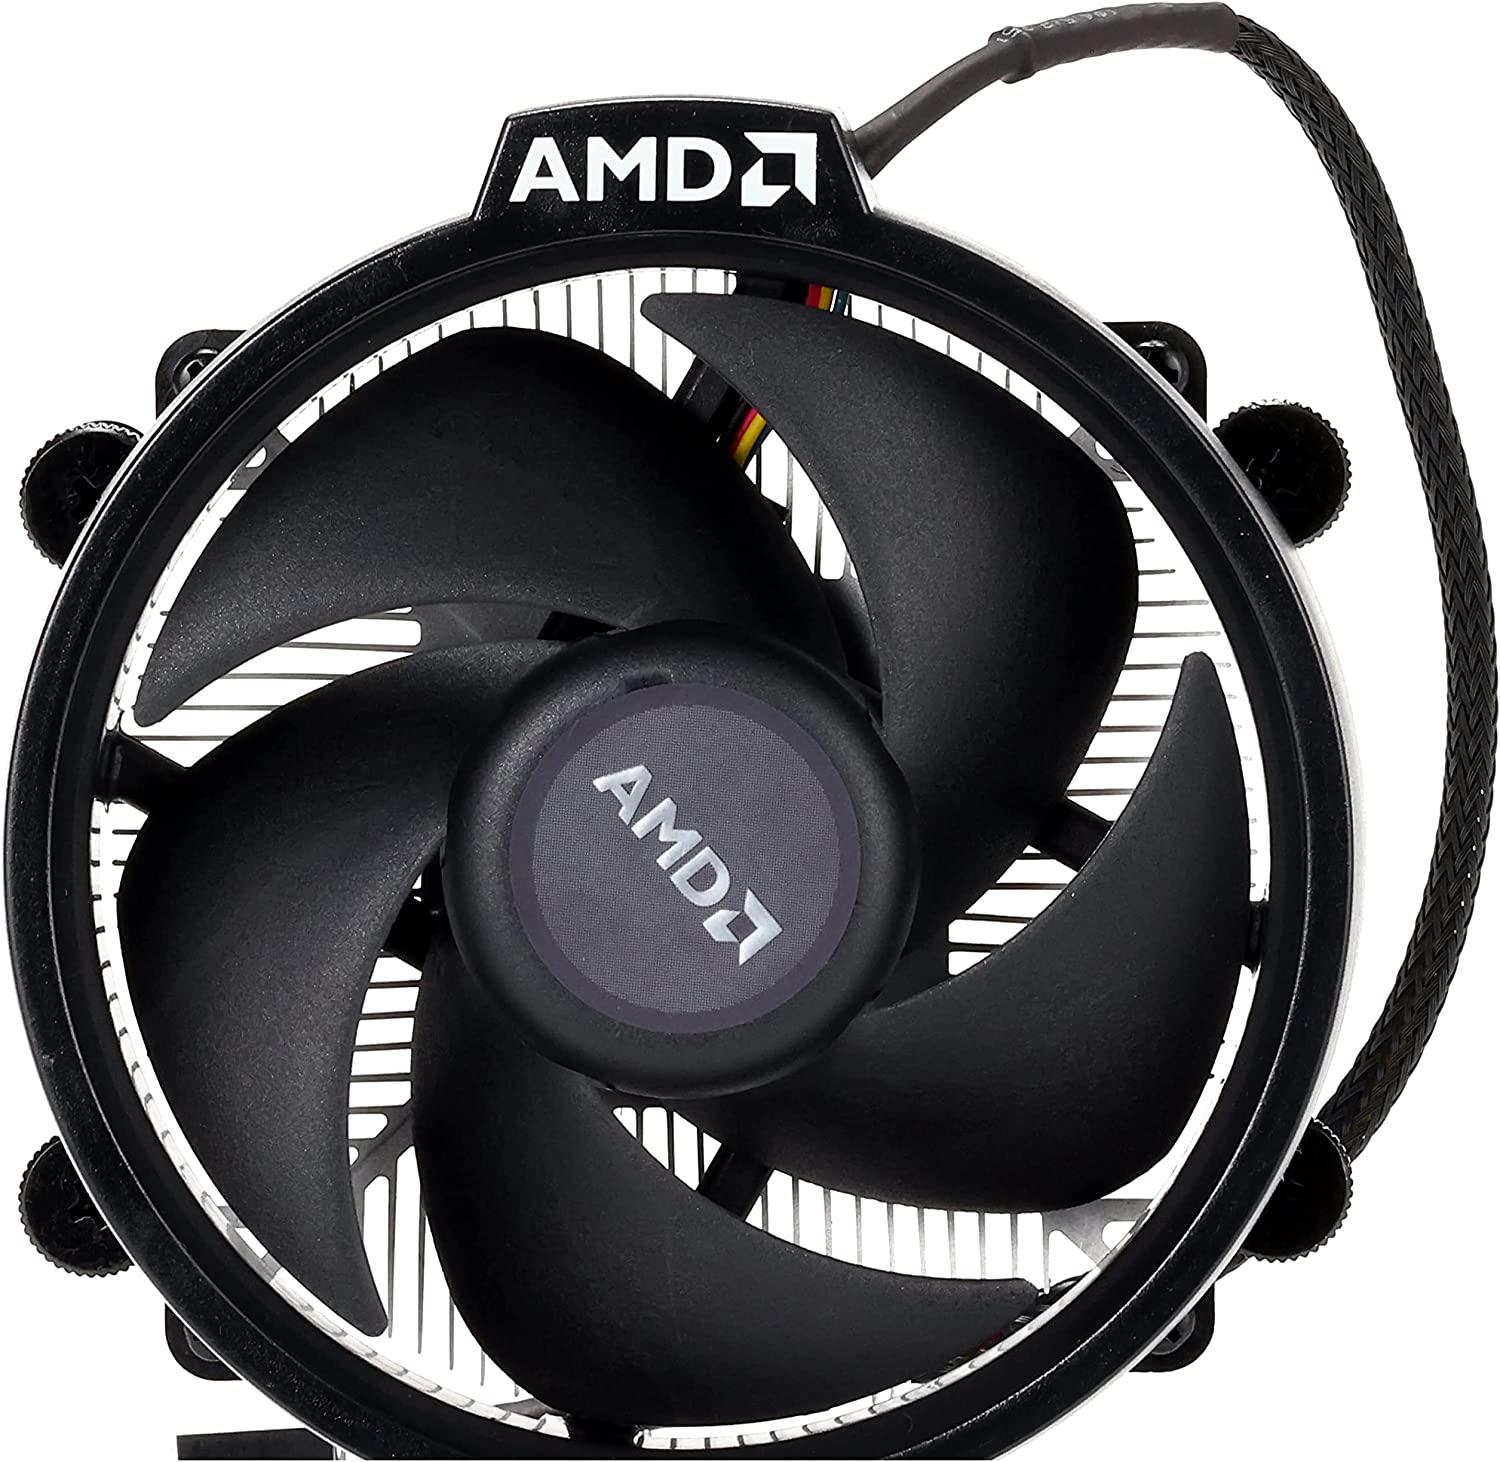 development of until now Try AMD Ryzen 7 5700G with Wraith Stealth Cooler